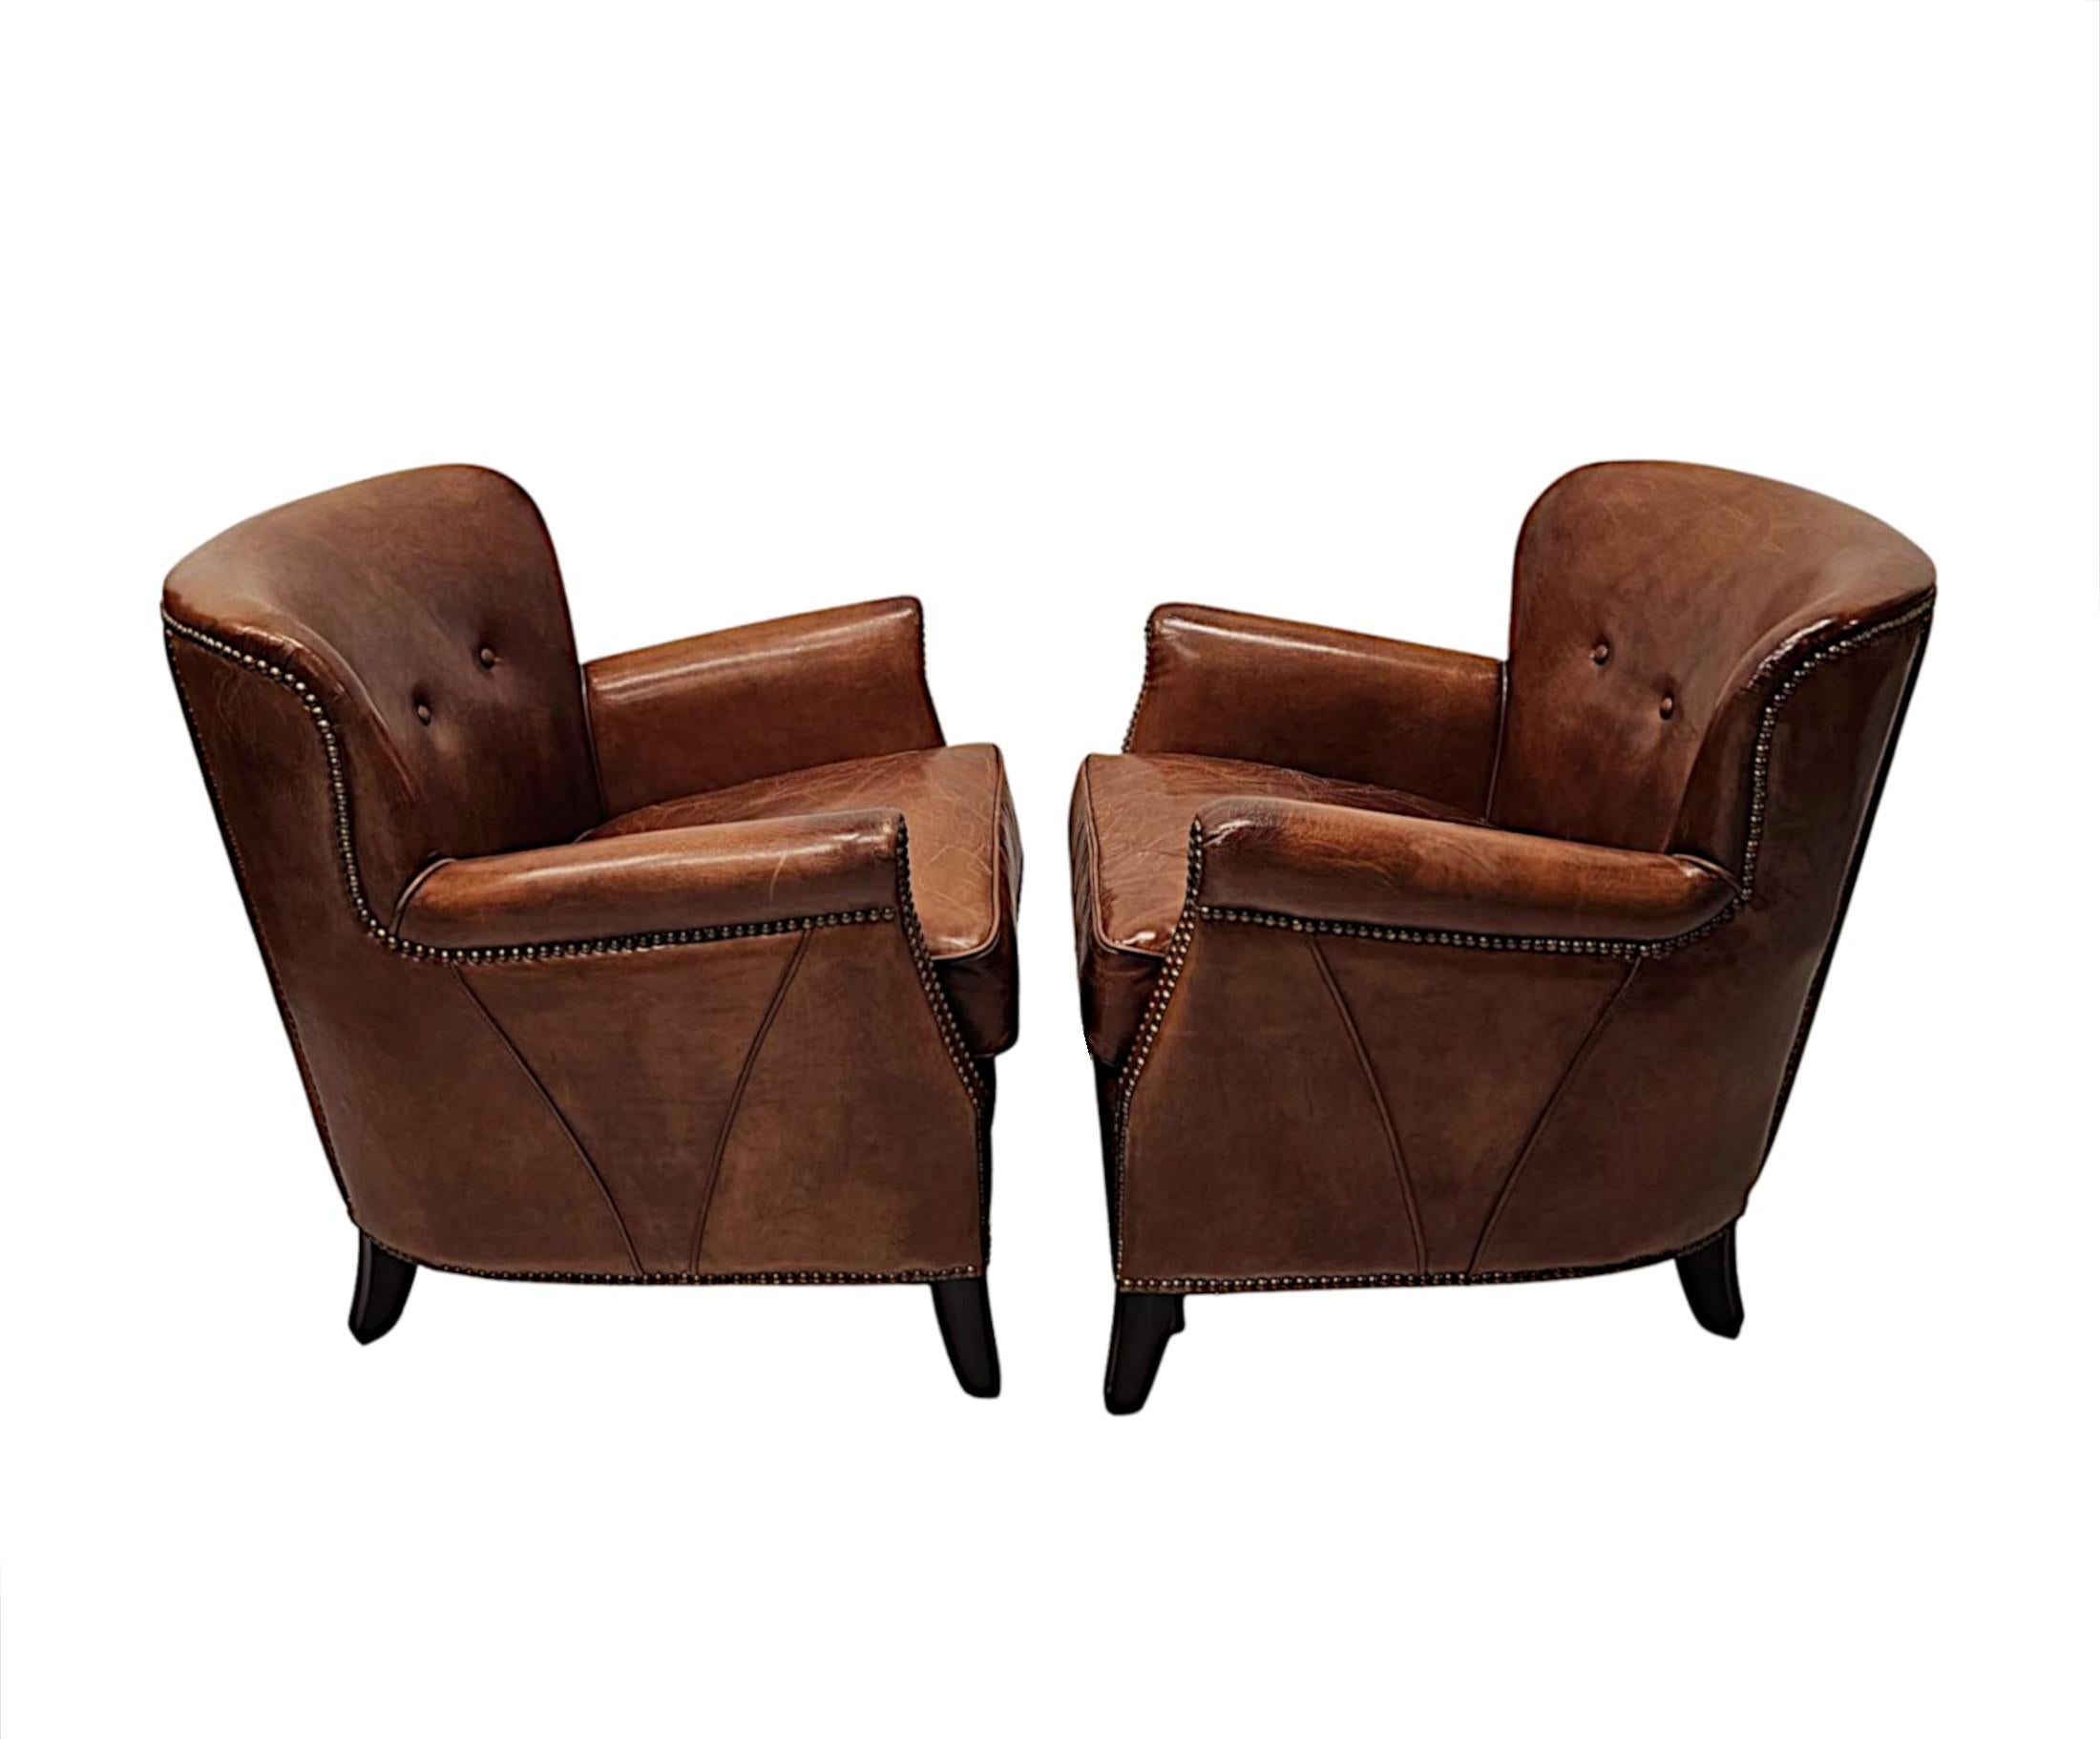 A stunning pair of club armchairs in the Art Deco style of neat proportions, fabulous quality and upholstered in gorgeously rich elegant brown leather with decorative brass studding and piping detail throughout.  The cushioned and shaped button back